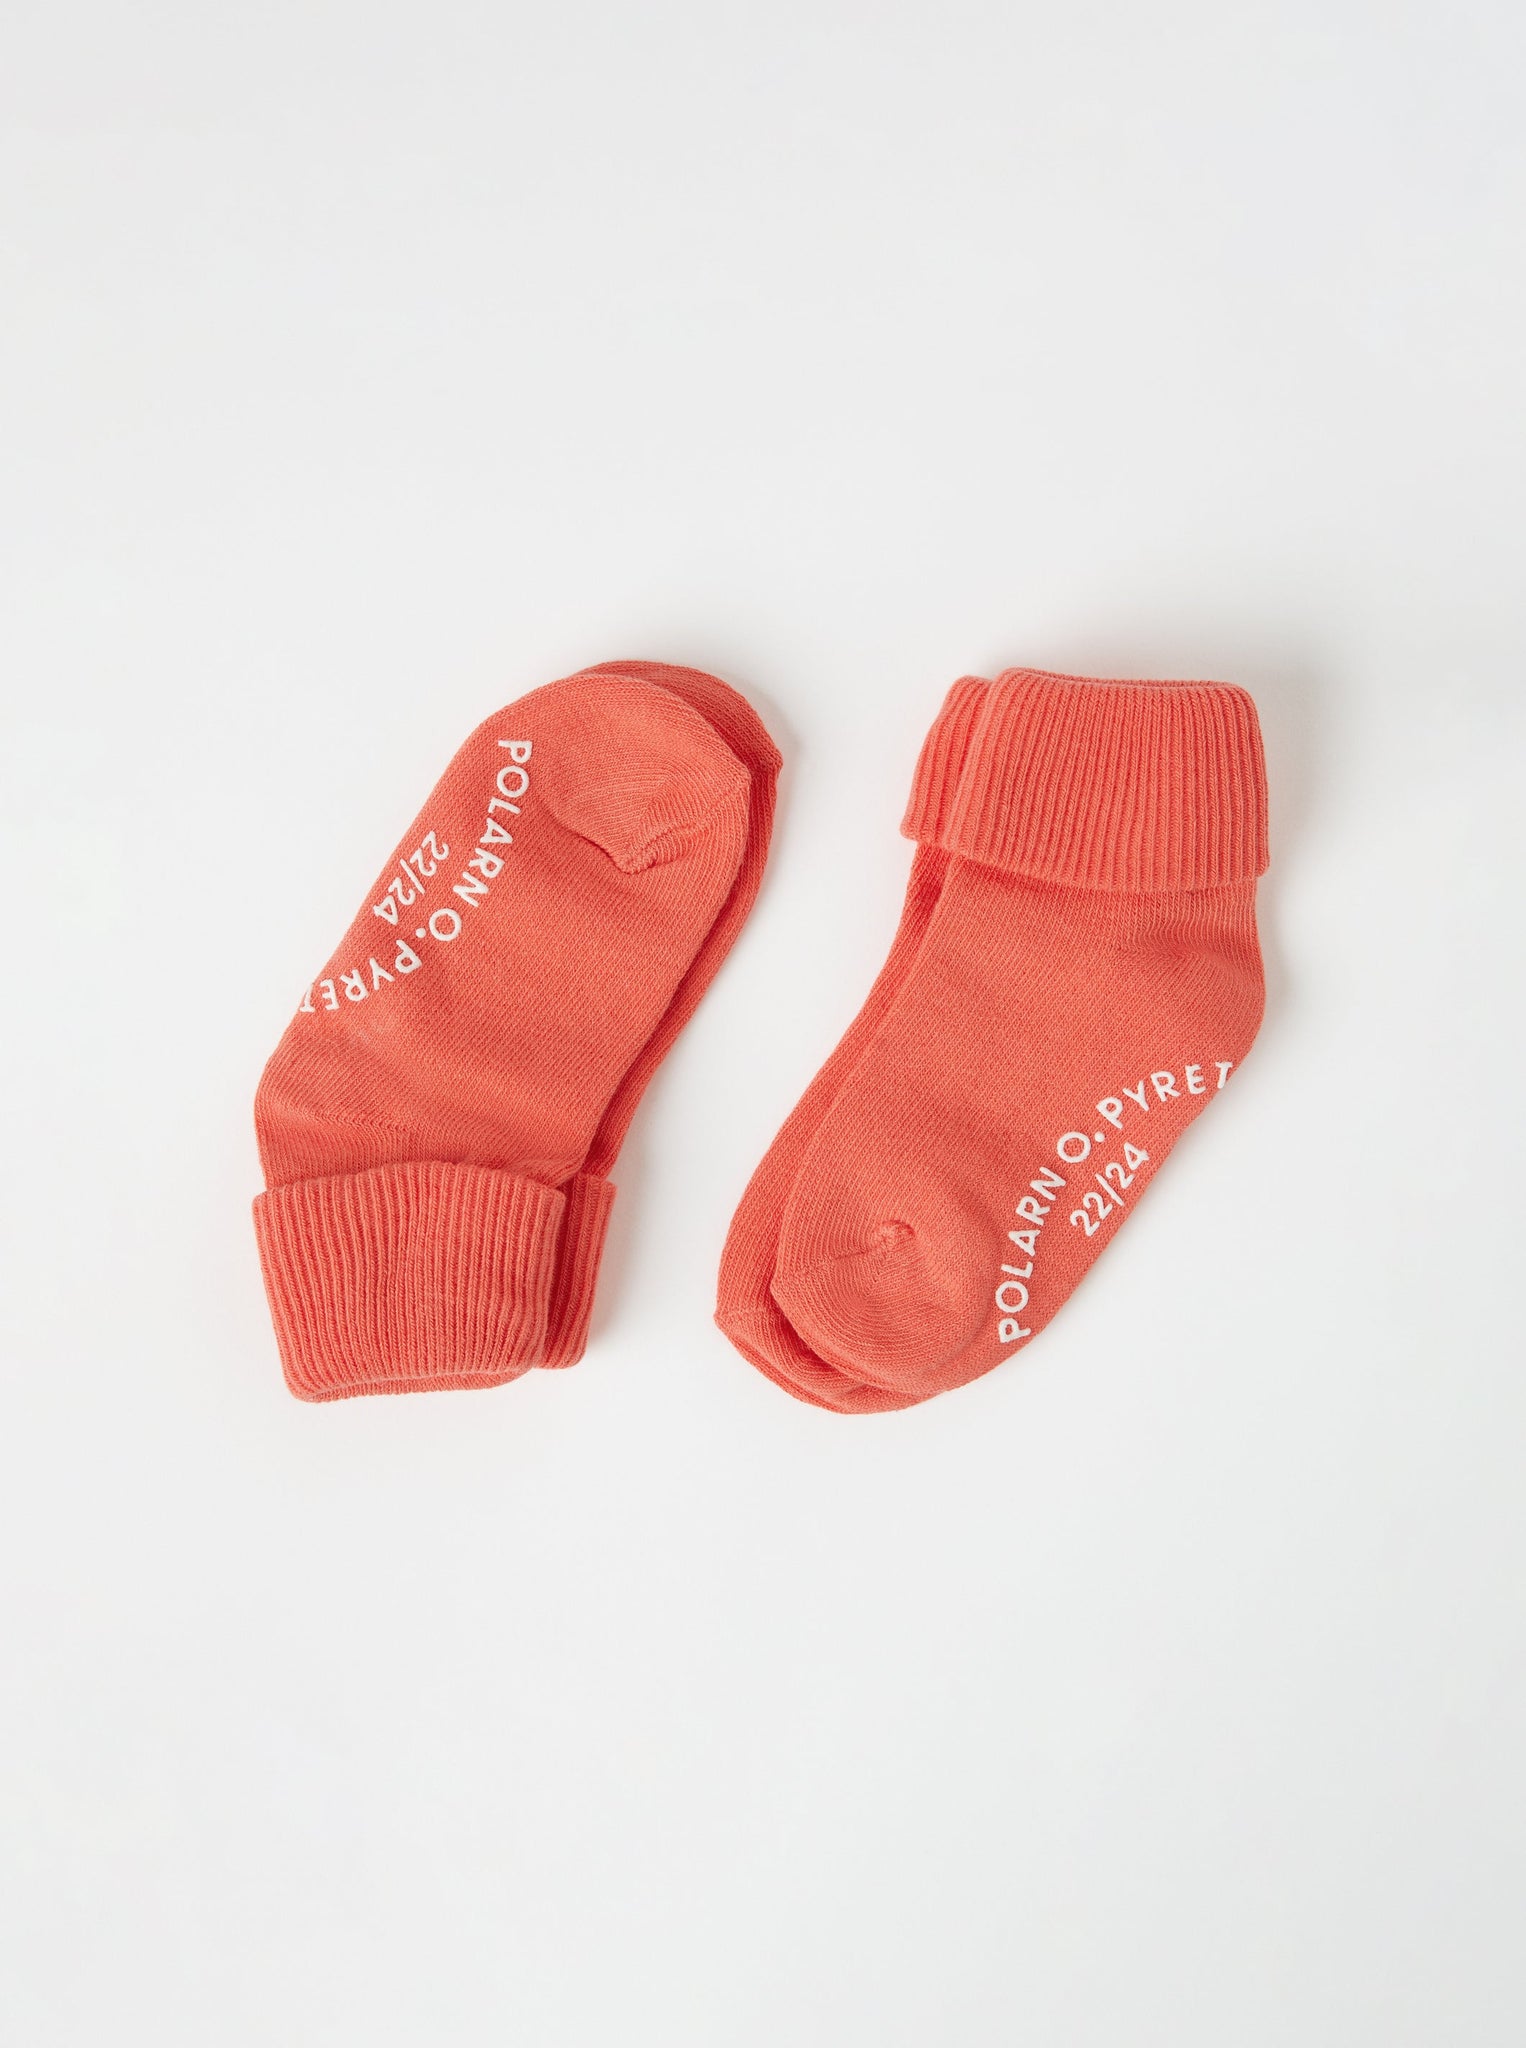 Two Pack Orange Antislip Kids Socks from the Polarn O. Pyret kidswear collection. Clothes made using sustainably sourced materials.